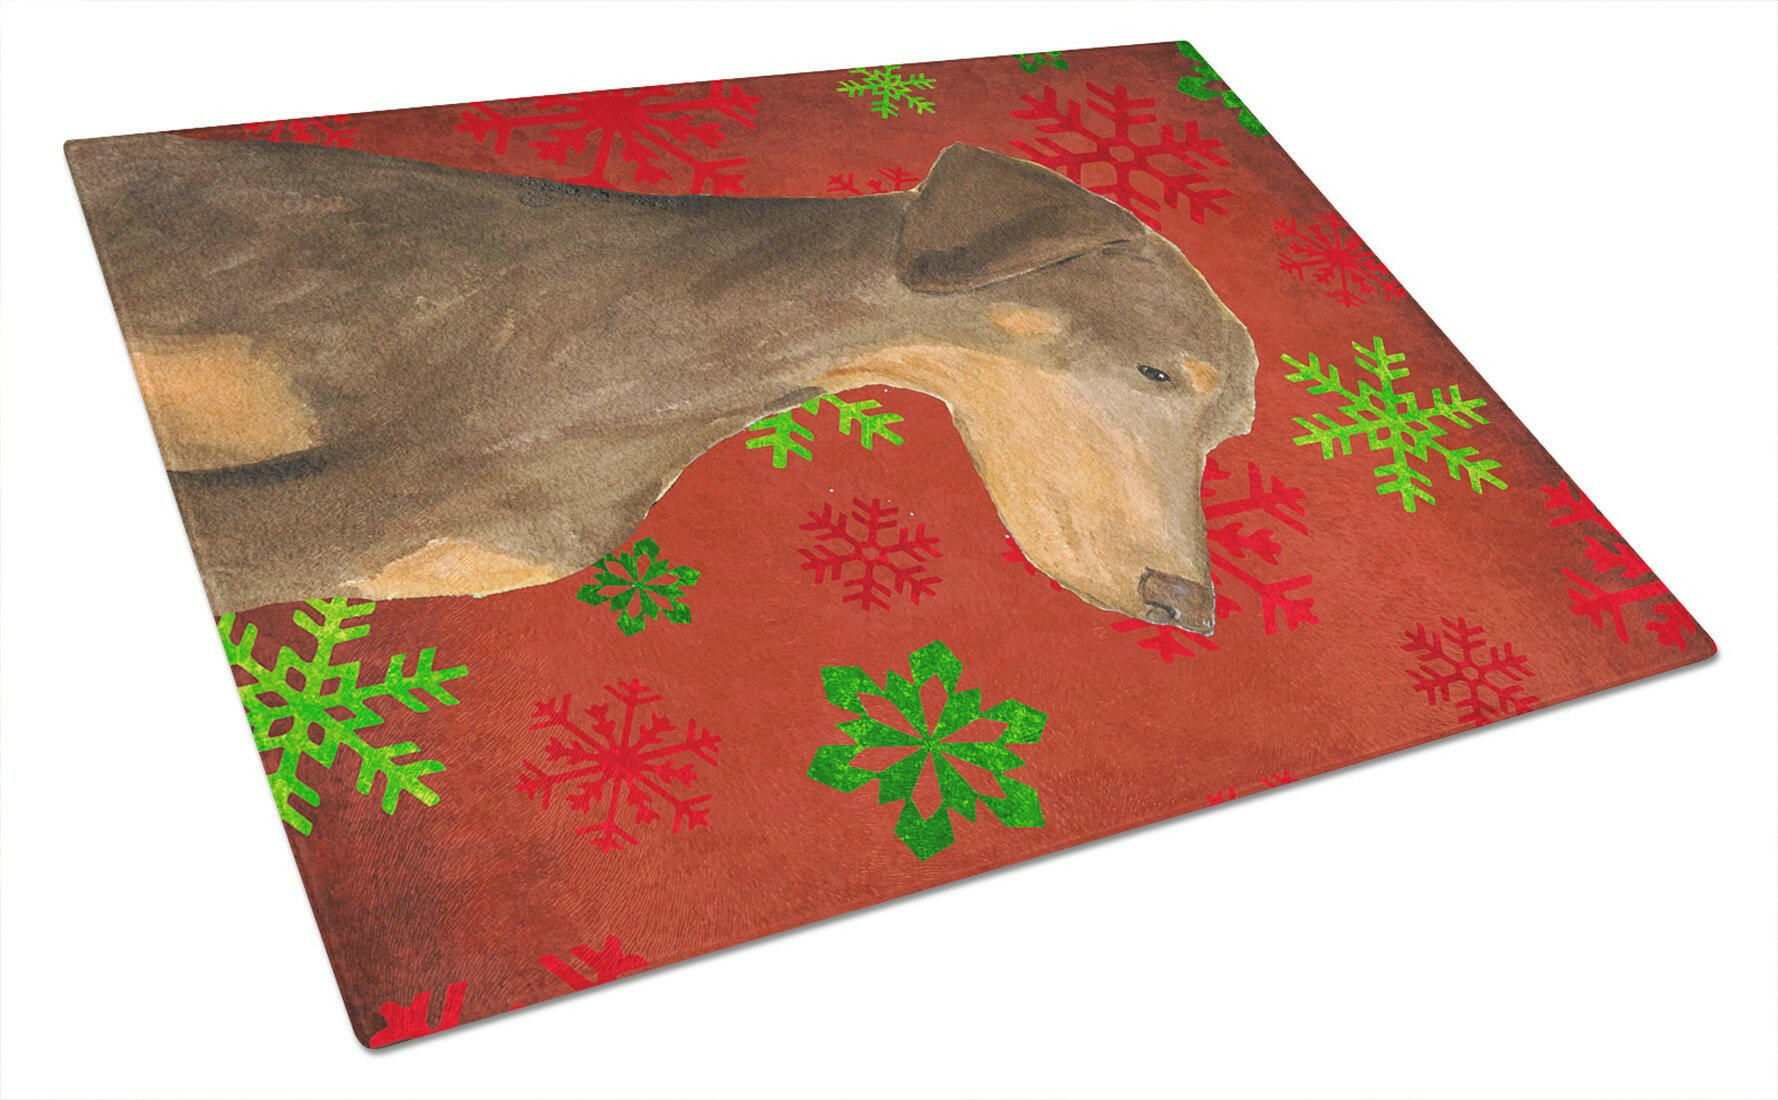 Doberman Red and Green Snowflakes Holiday Christmas Glass Cutting Board Large by Caroline's Treasures